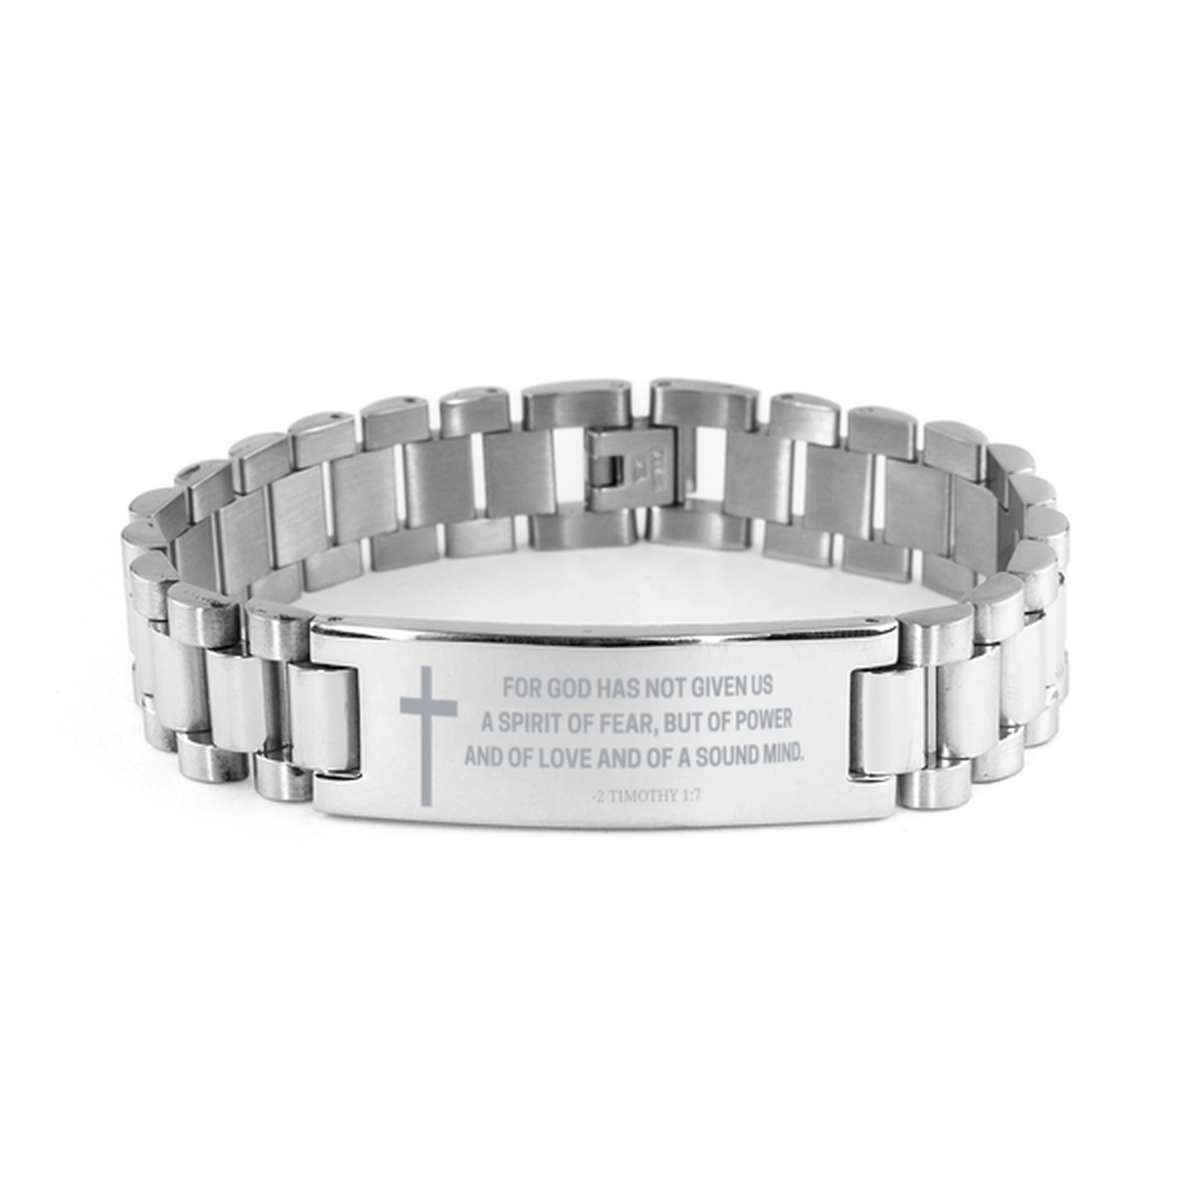 Baptism Gifts For Teenage Boys Girls, Christian Bible Verse Ladder Stainless Steel Bracelet, For God has not given us, Catholic Confirmation Gifts for Son, Godson, Grandson, Nephew